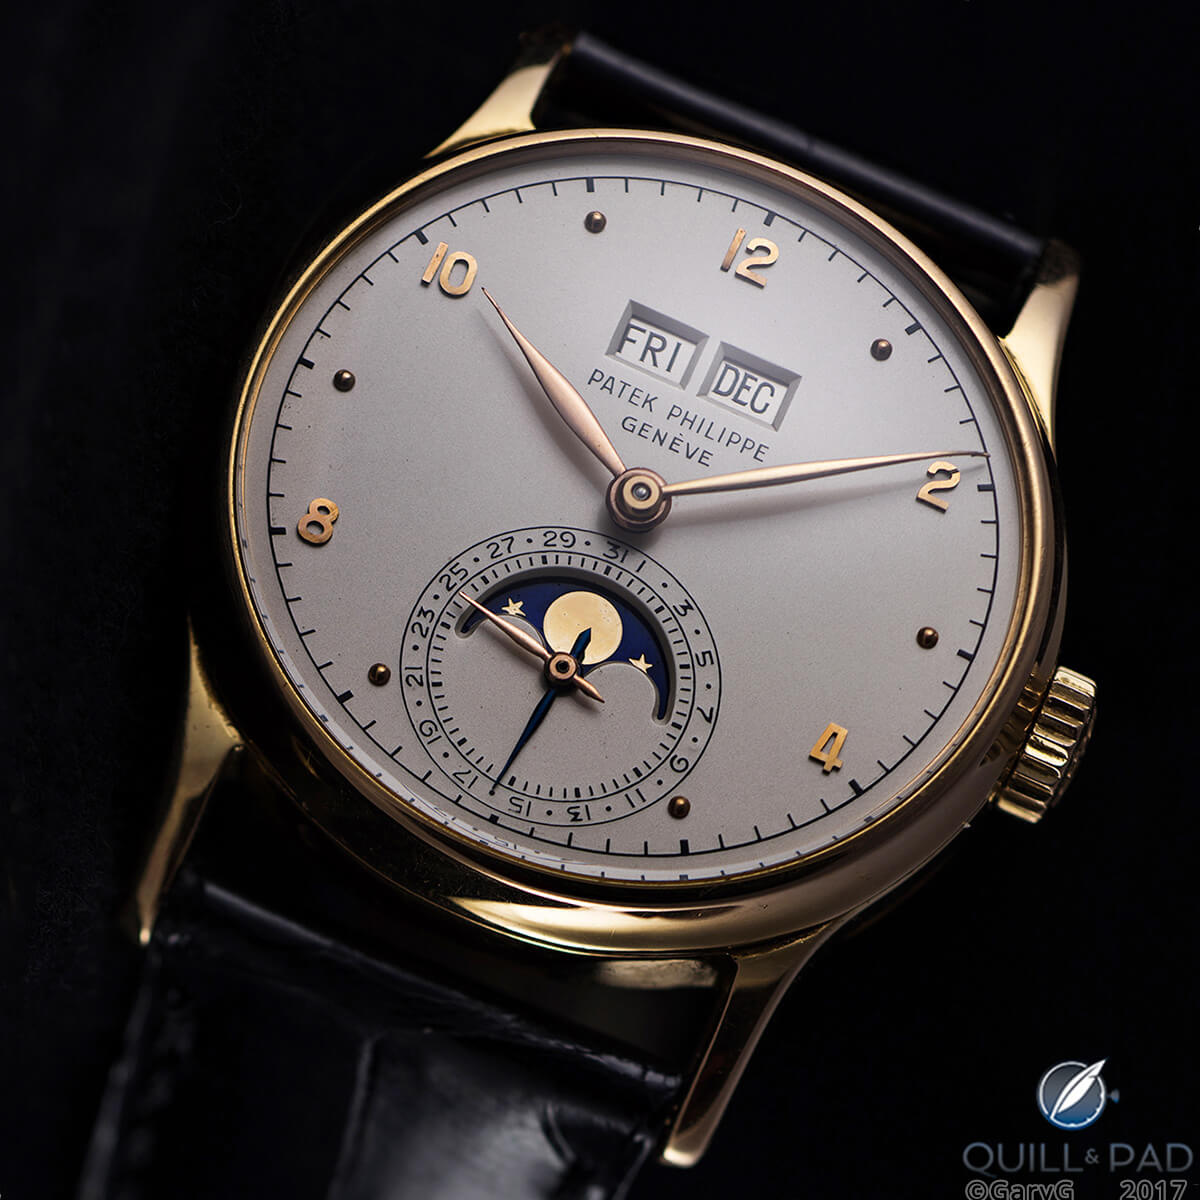 Ticking legend: the first serially produced perpetual calendar wristwatch, Patek Philippe Reference 1526